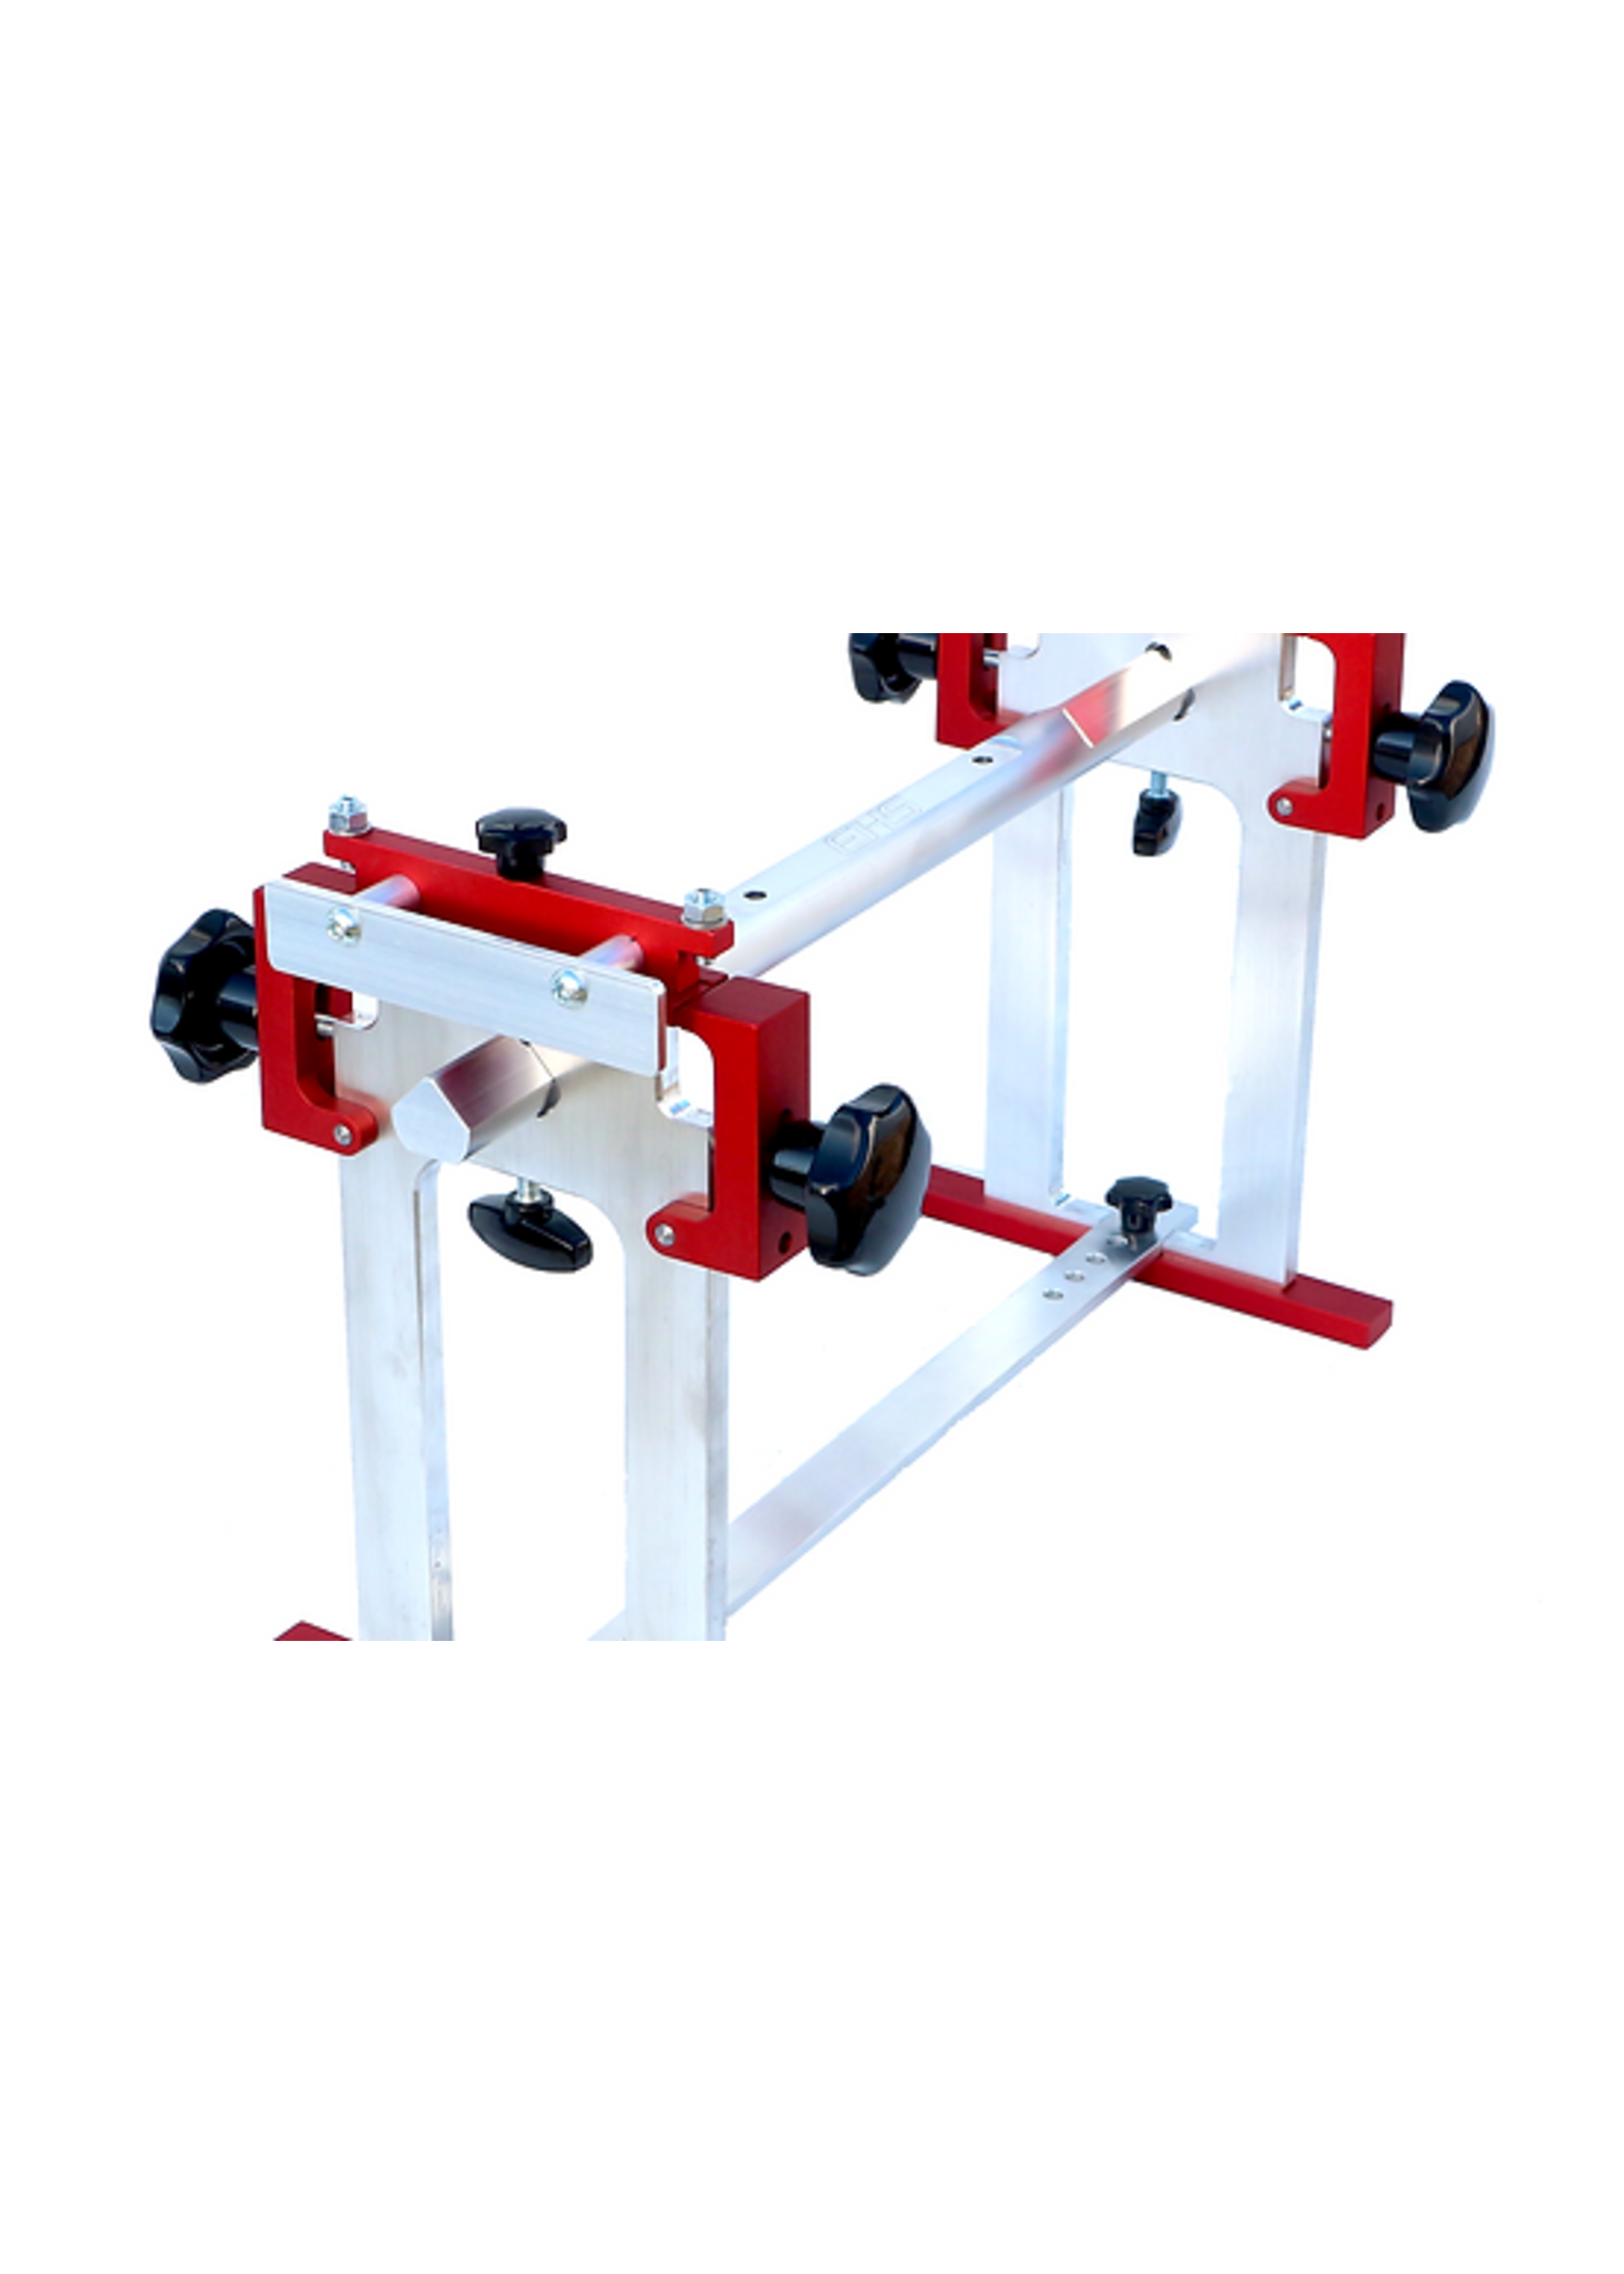 EHS EHS ST Sharpening bench Portable edition